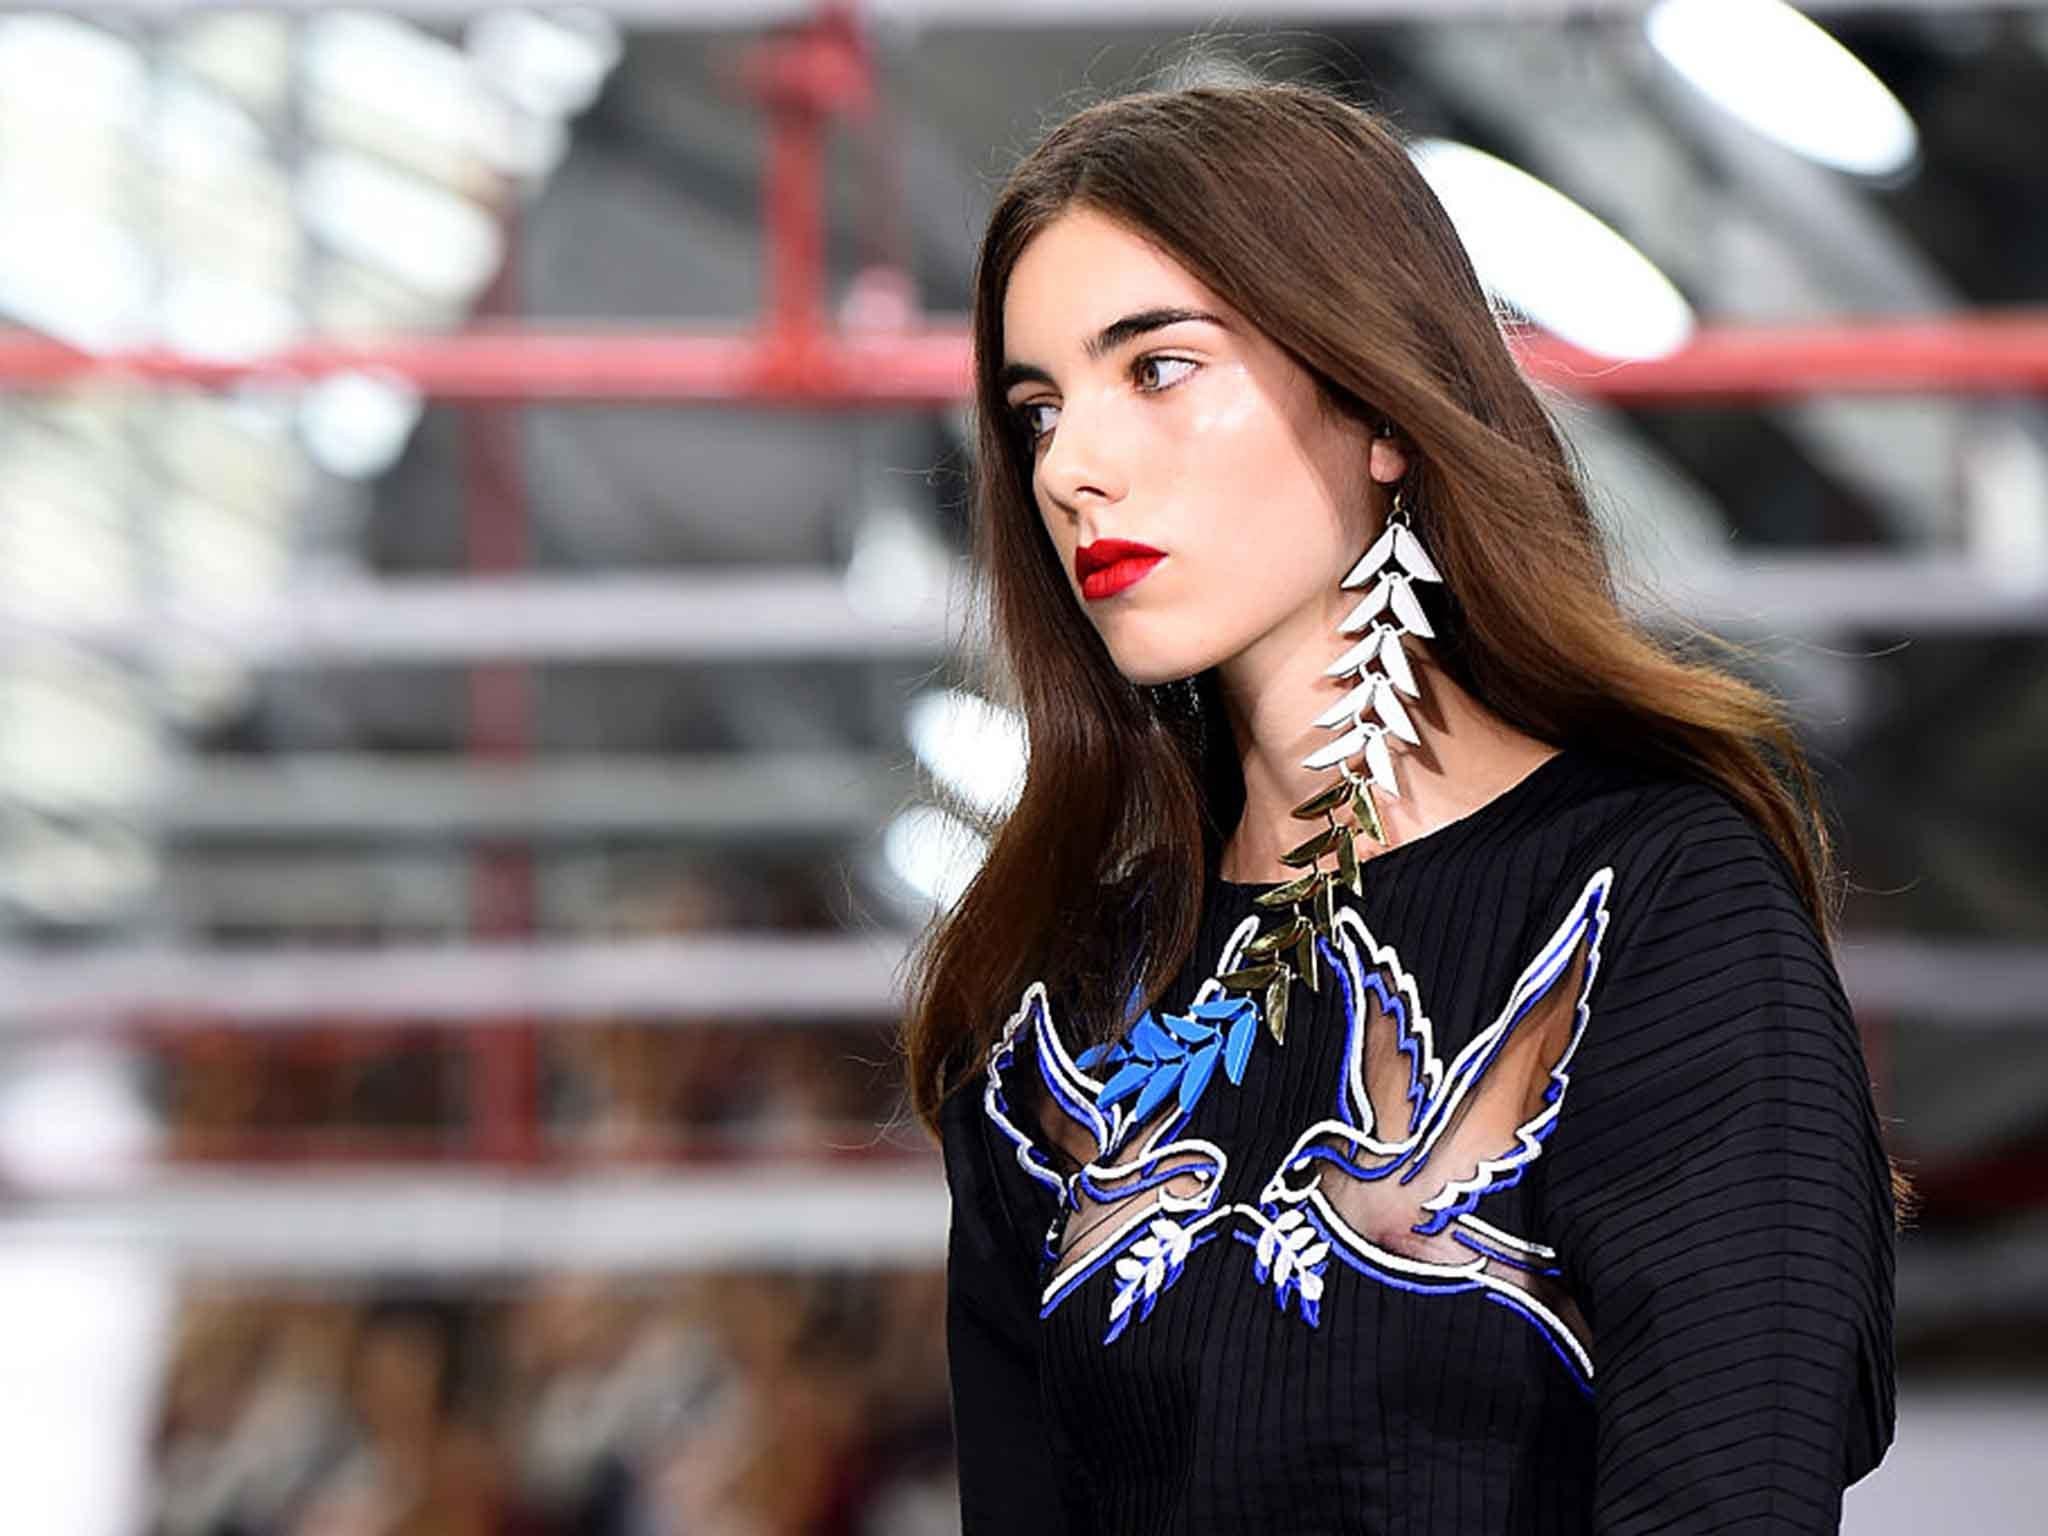 Mary Katrantzou's collection featured single olive-leaf earrings in electric blue, gold and yellow